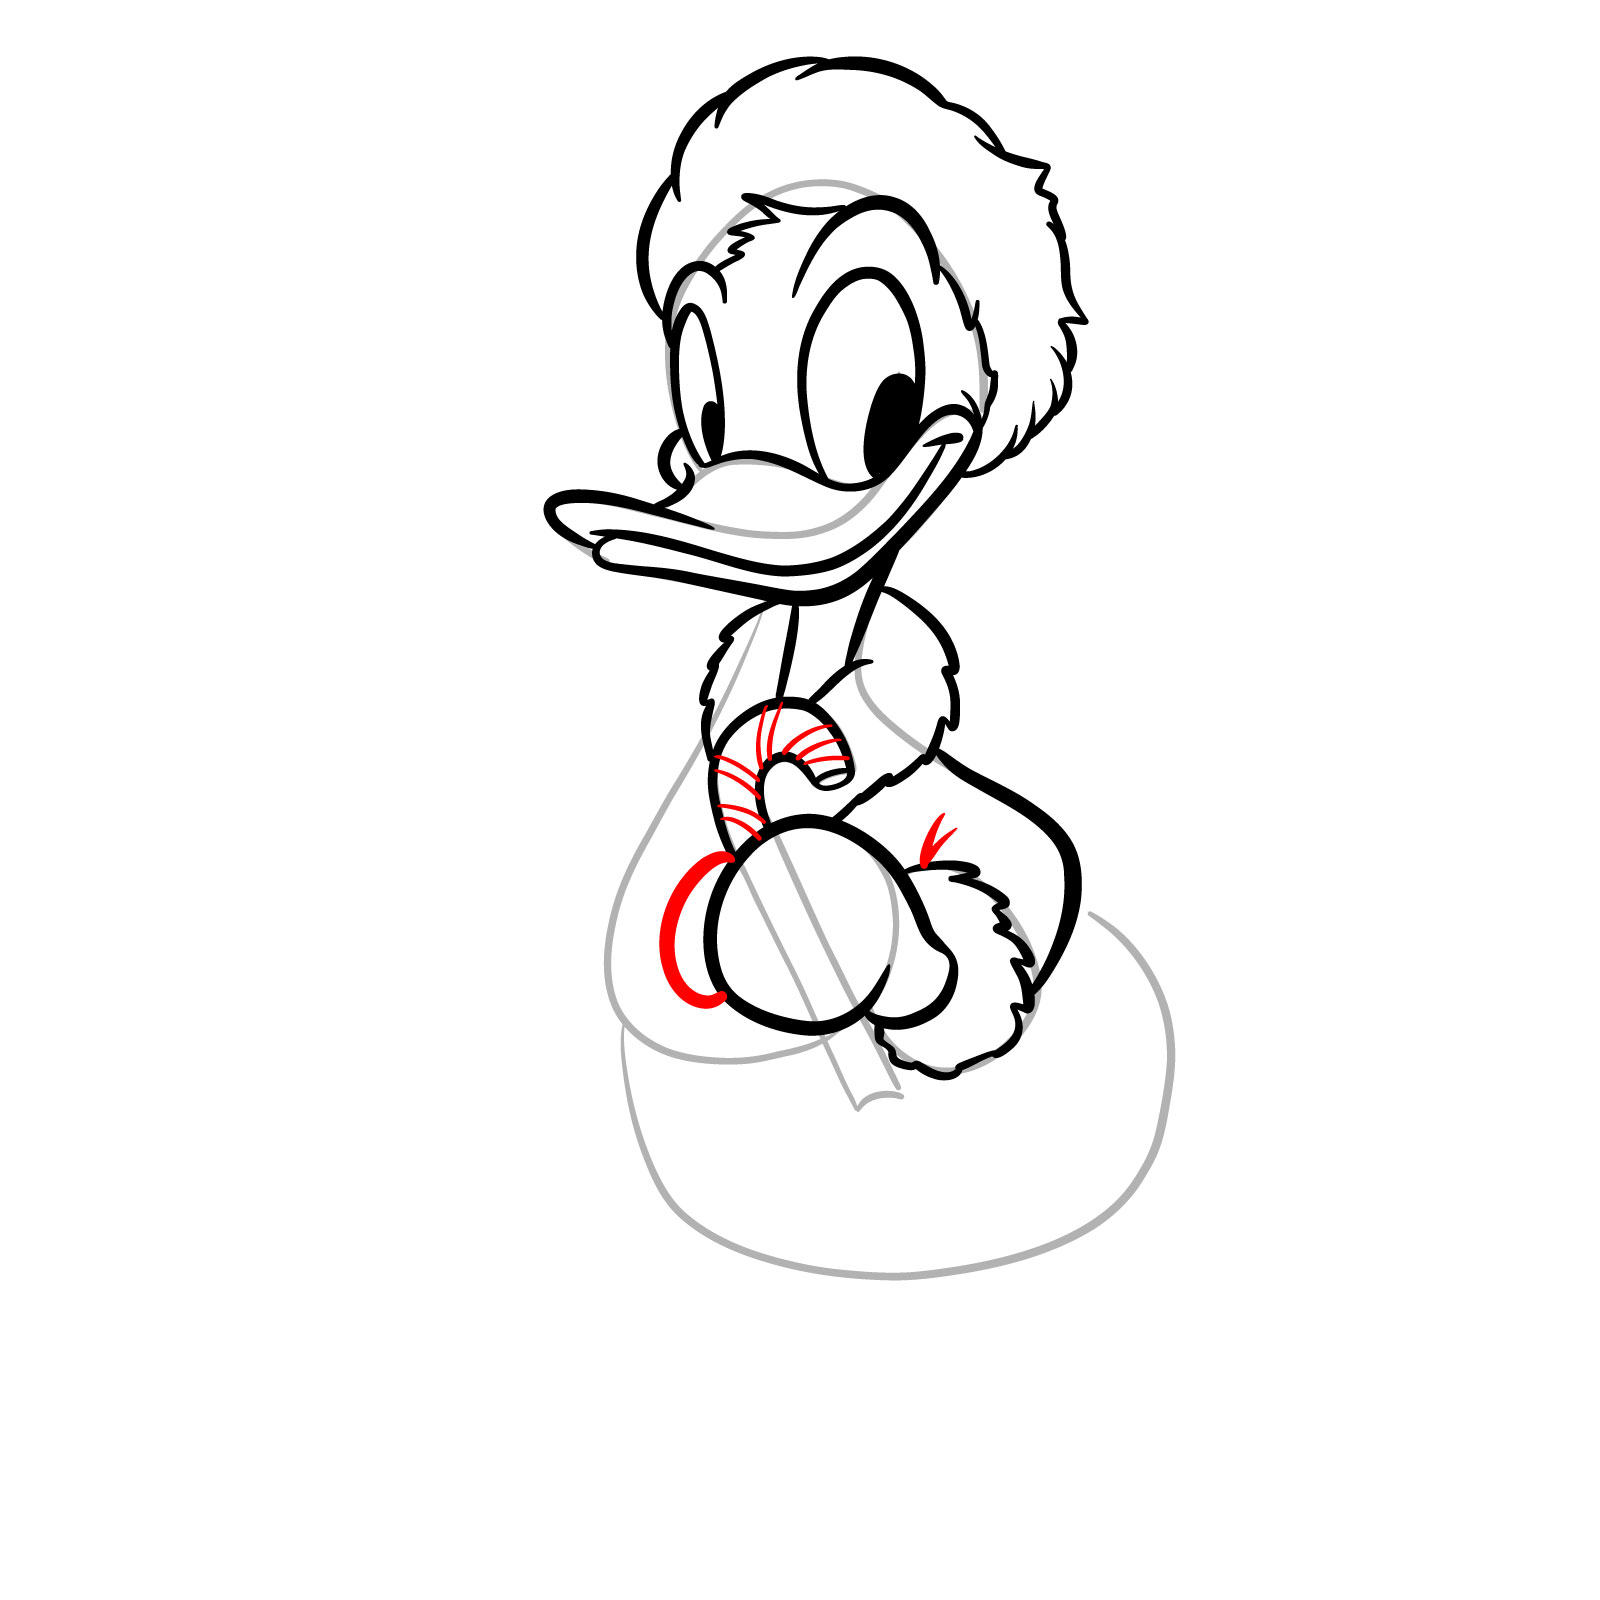 How to Draw Christmas Donald Duck - step 15